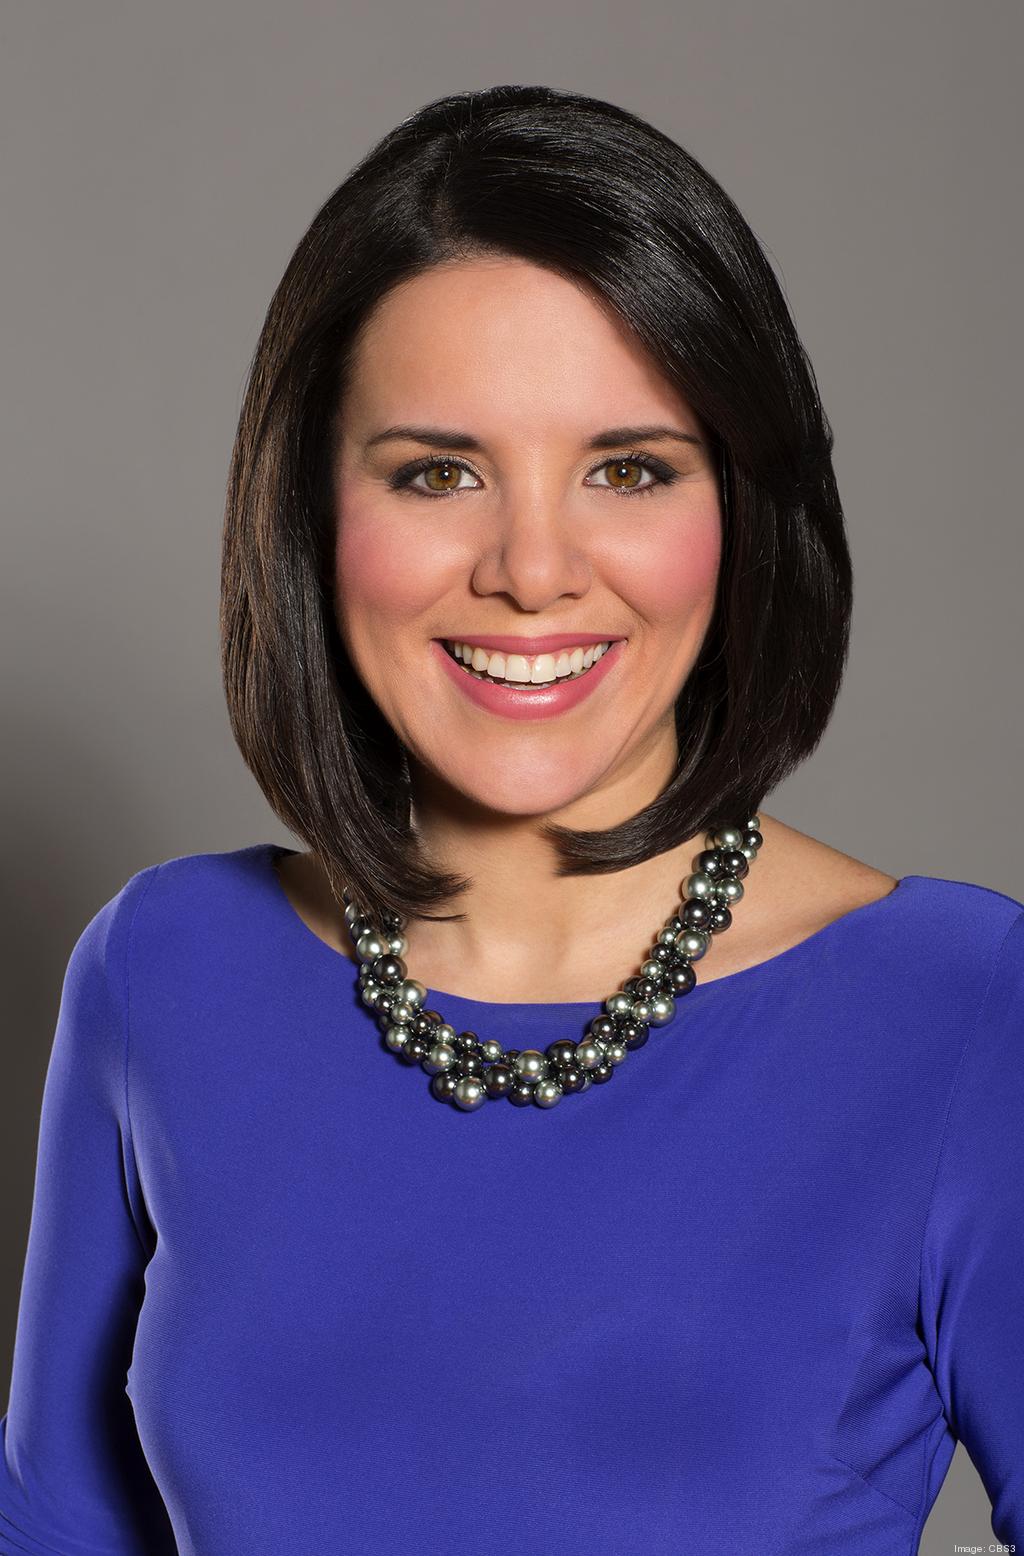 christina mansell add cbs 3 philly anchors photo